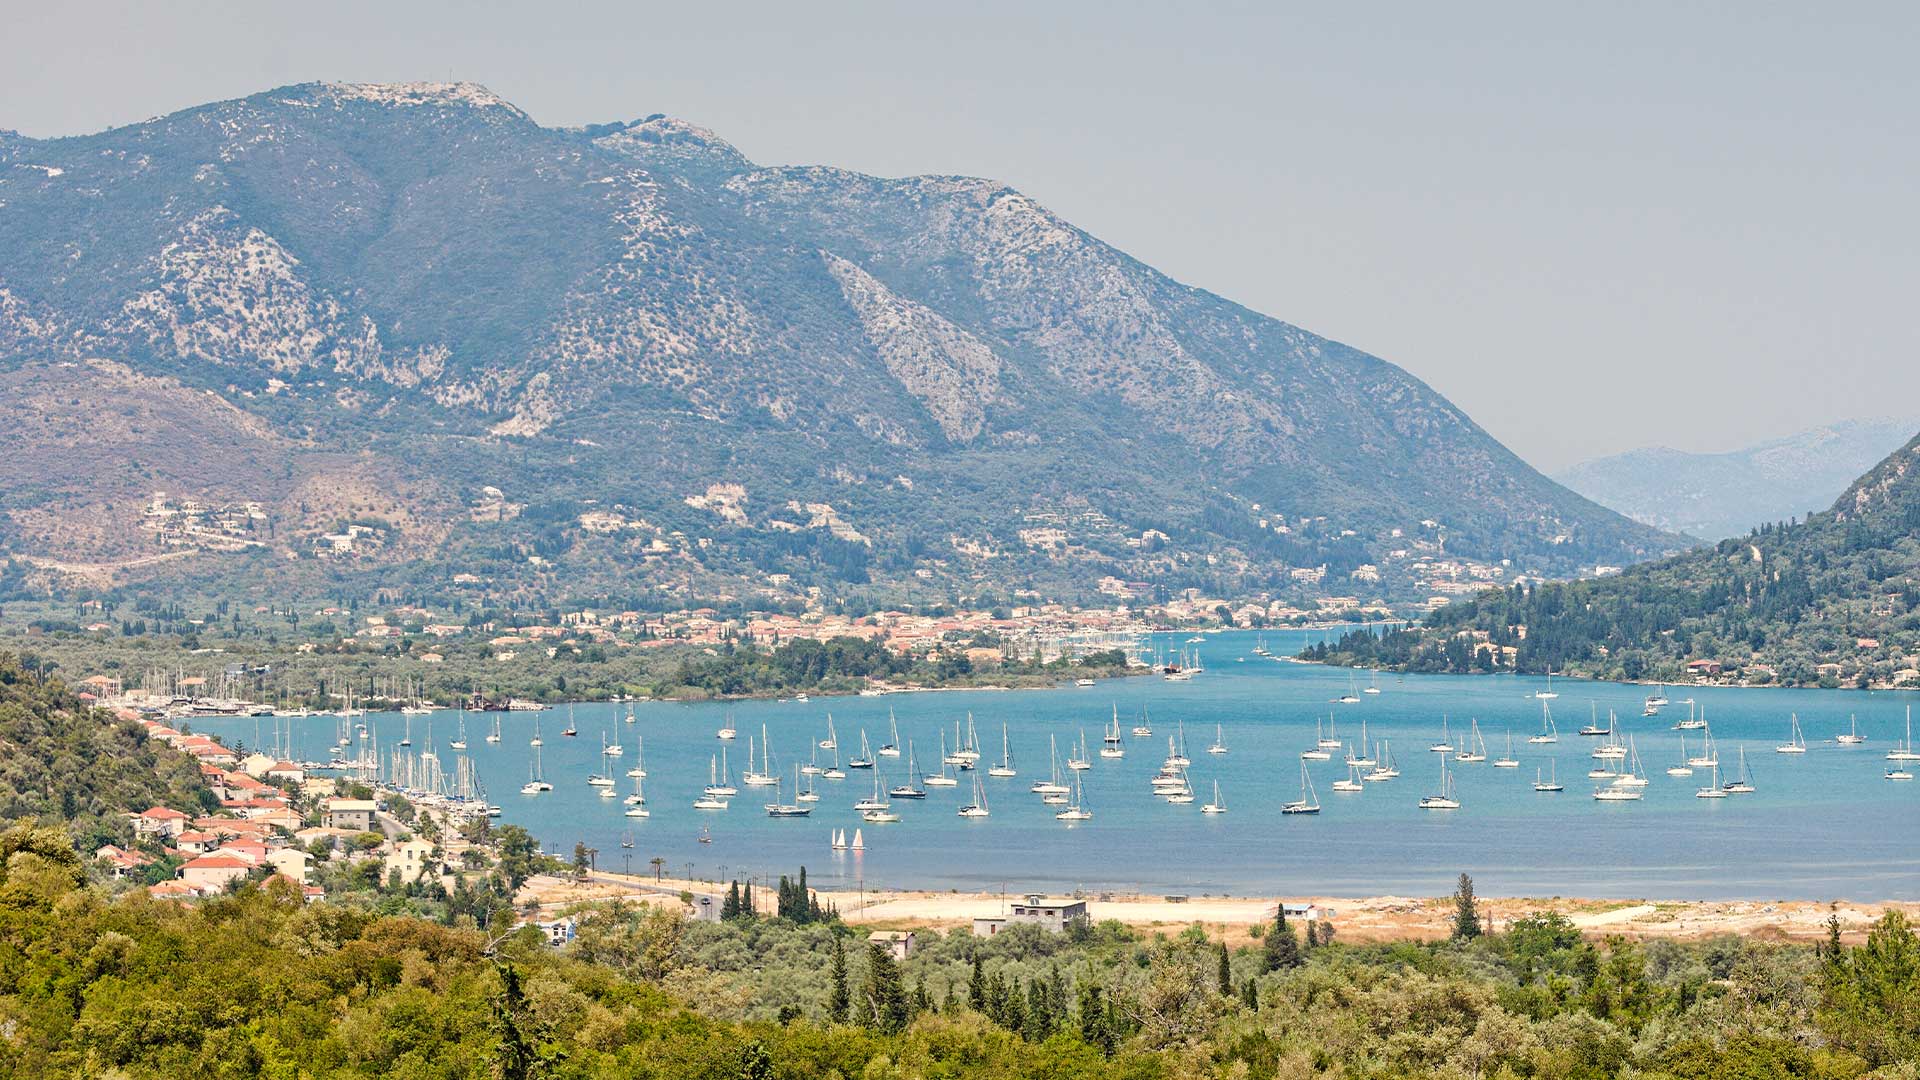 Lefkada Vlycho bay with moored boats, framed by lush hills – prime real estate location.